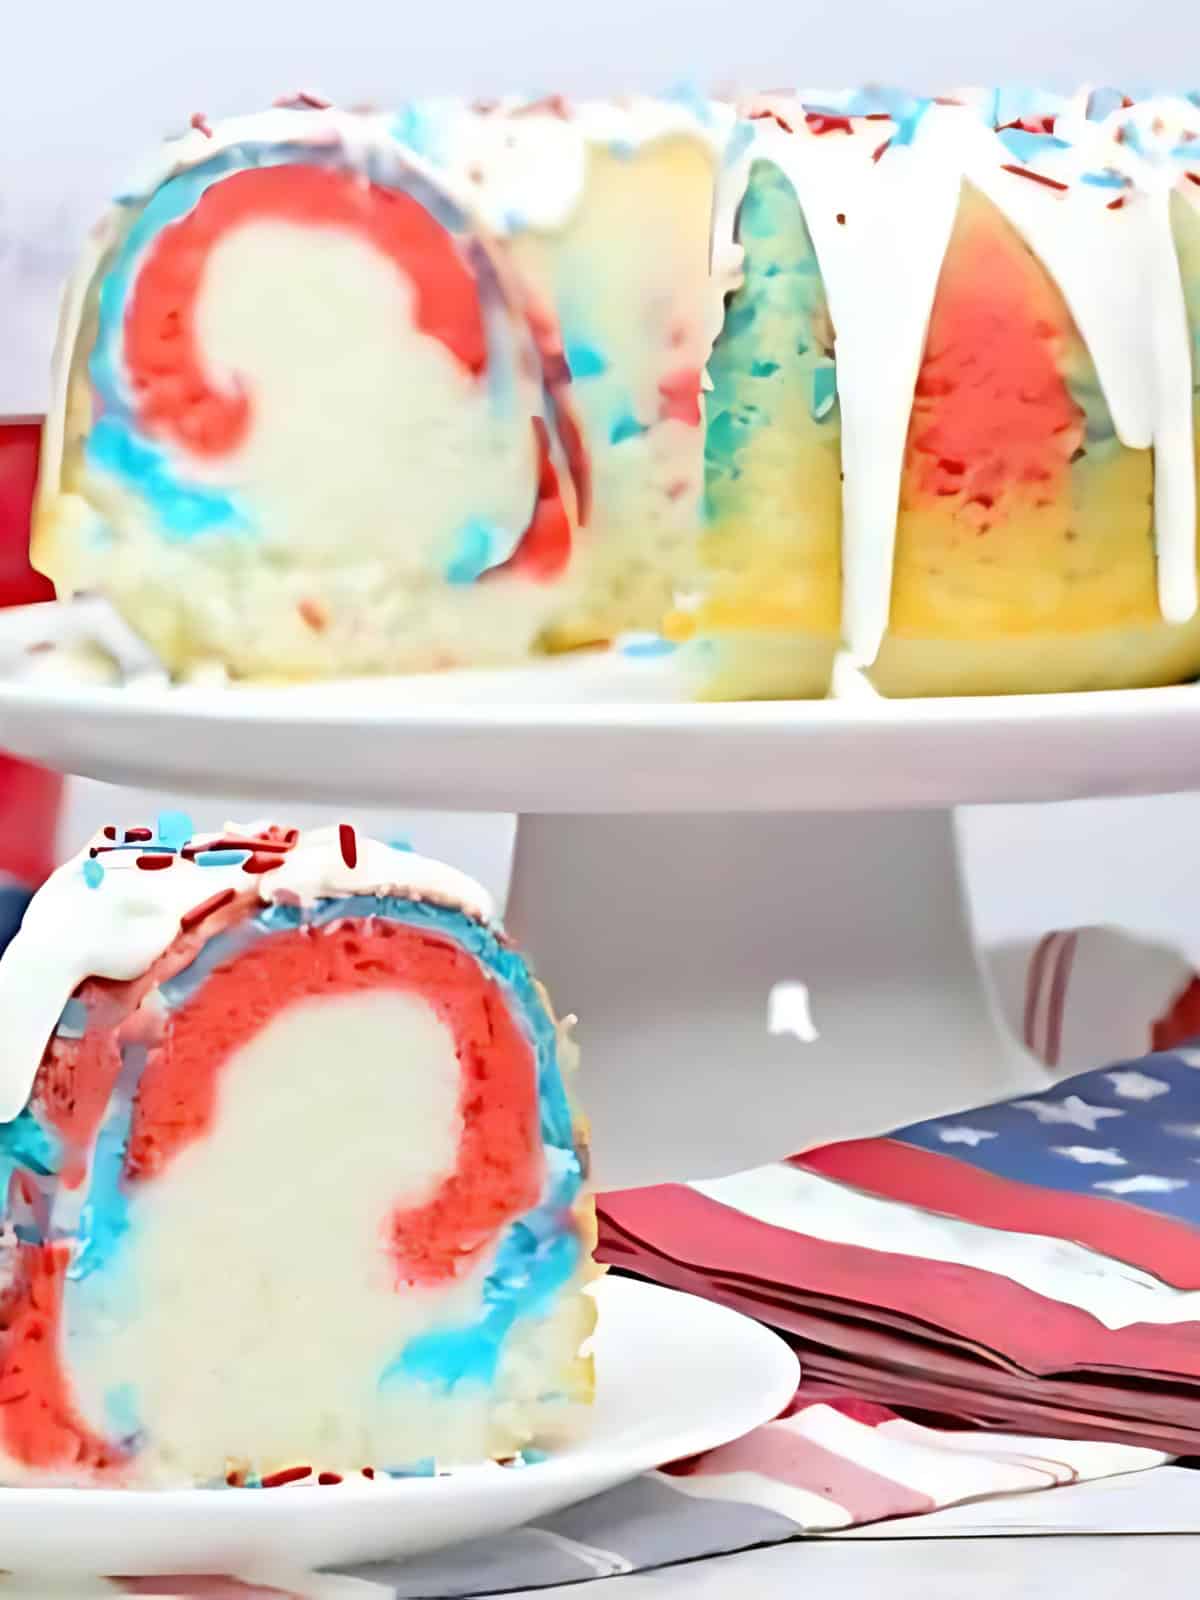 4th of July themed patriotic bundt cake being displayed.